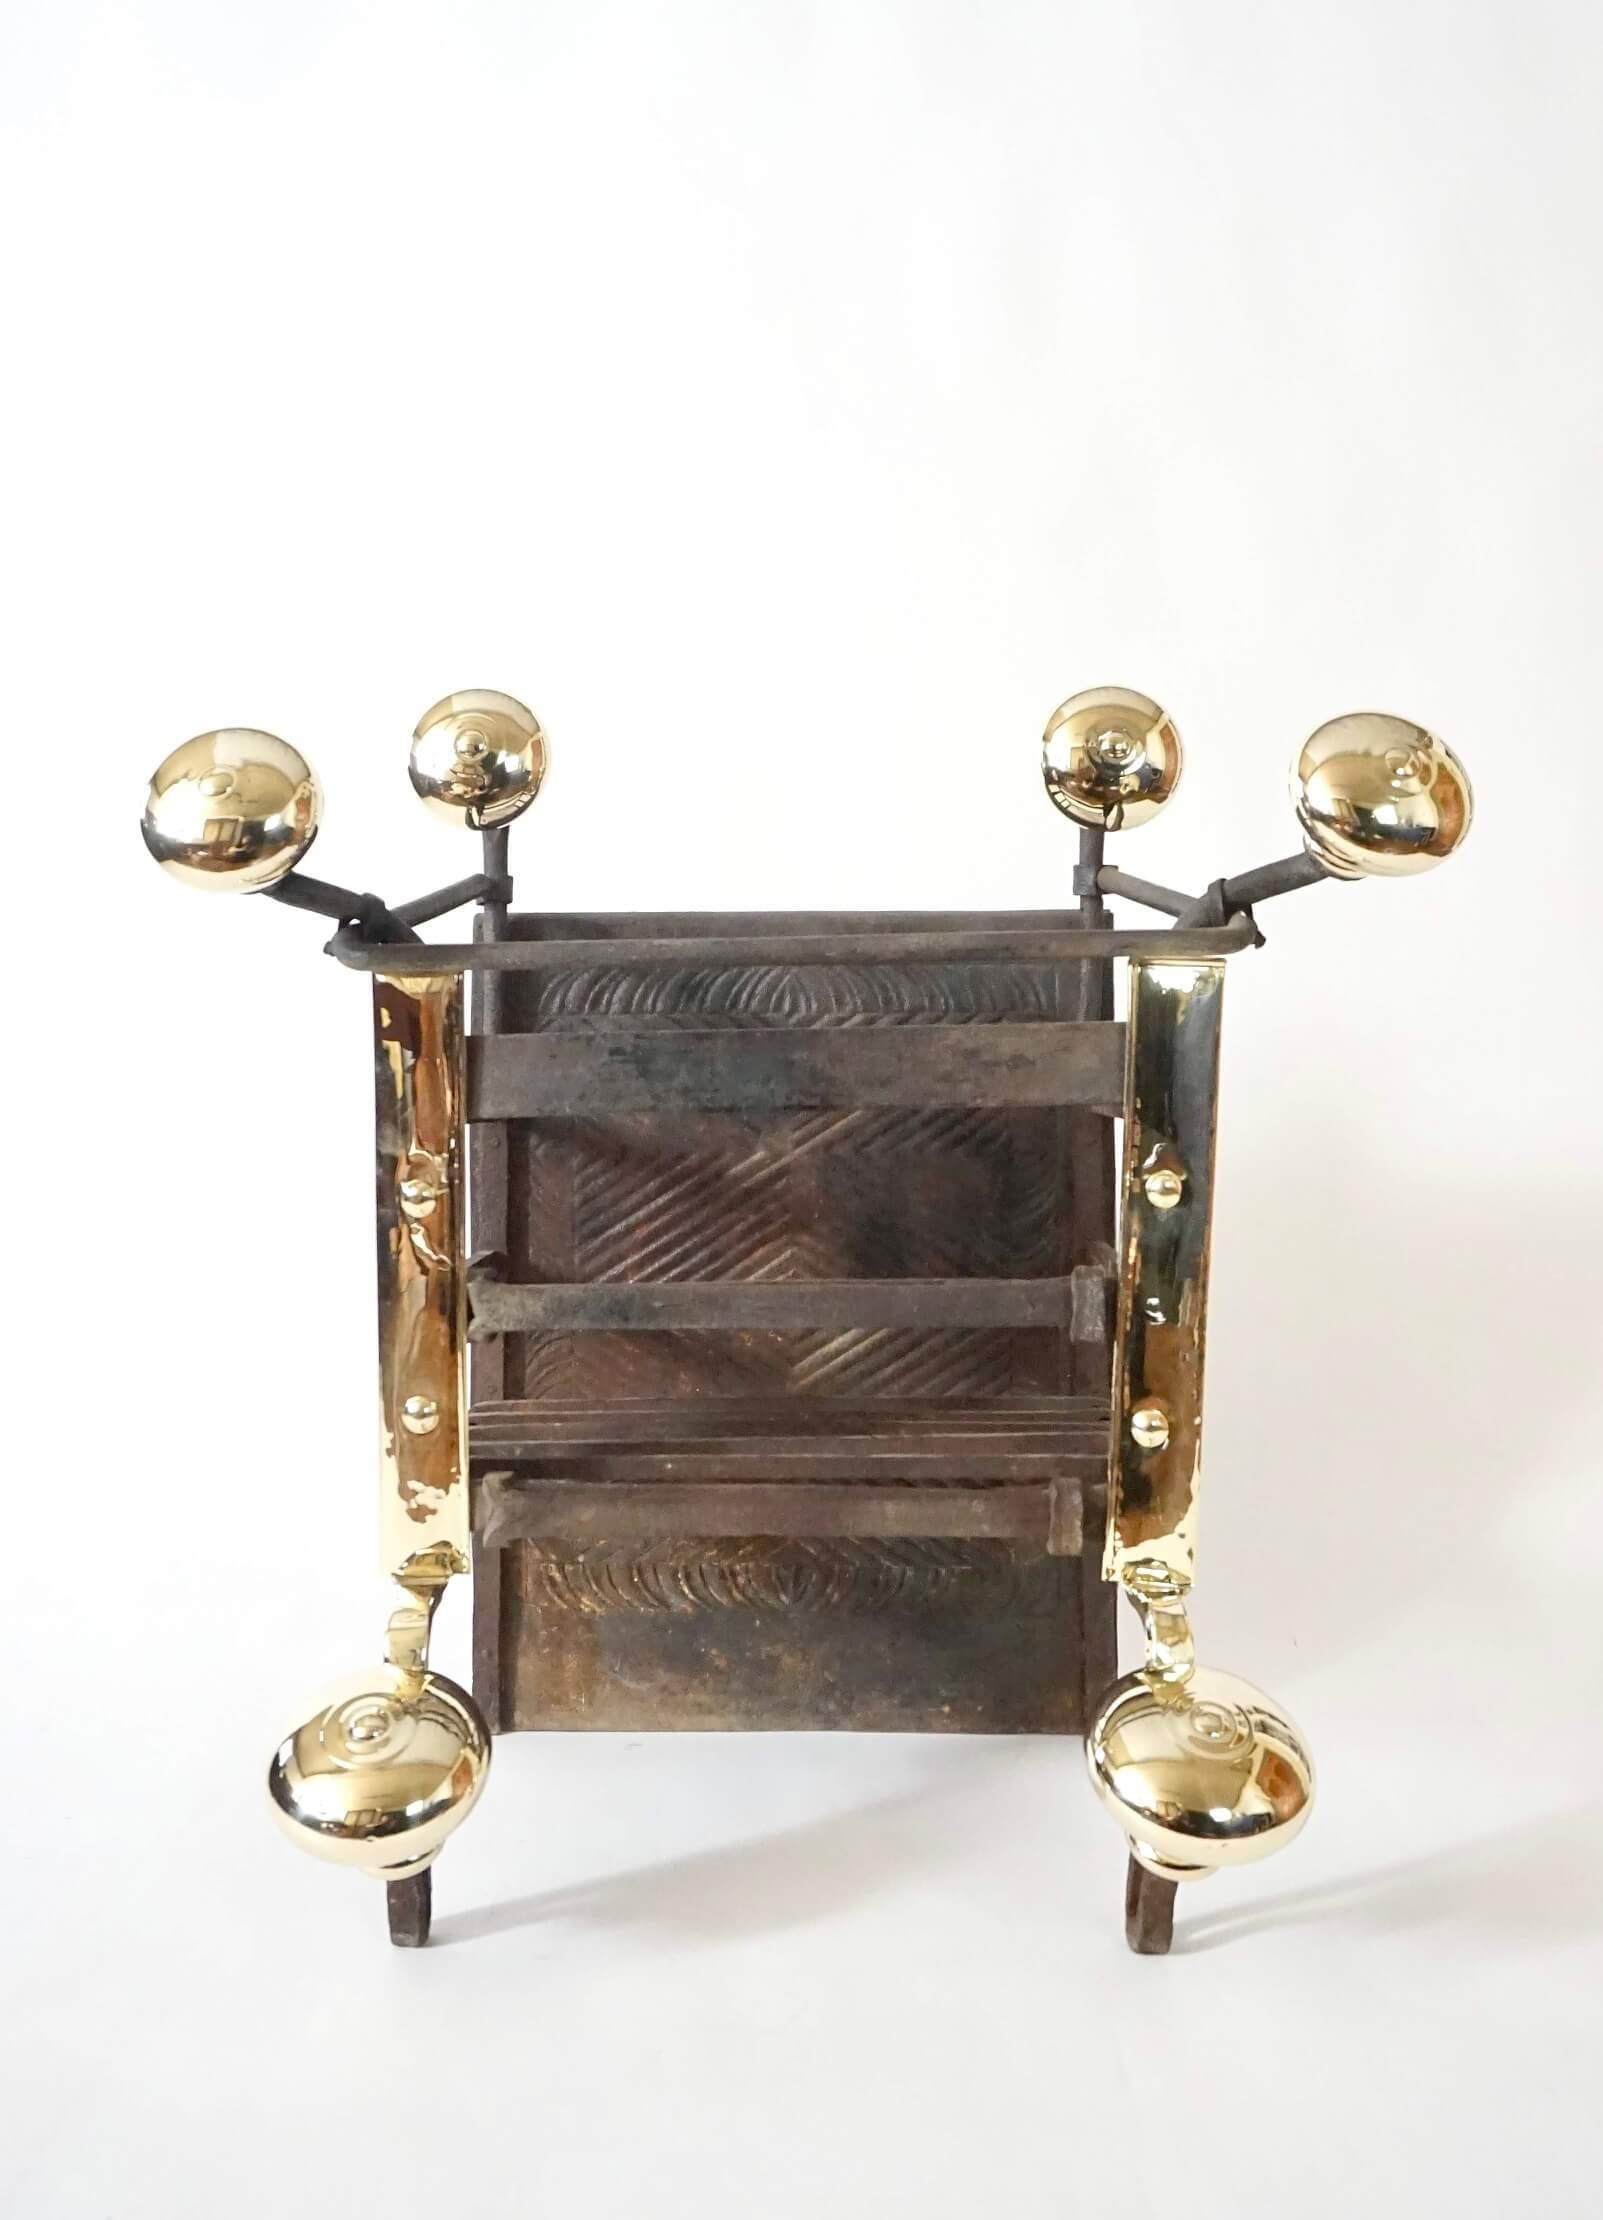 A wonderful 17th century and later Dutch Baroque period wrought iron and brass fire grate of large scale, the rectangular basket with cast-iron back having foliate and geometric designs connected by wrought supports, the front brass clad, with